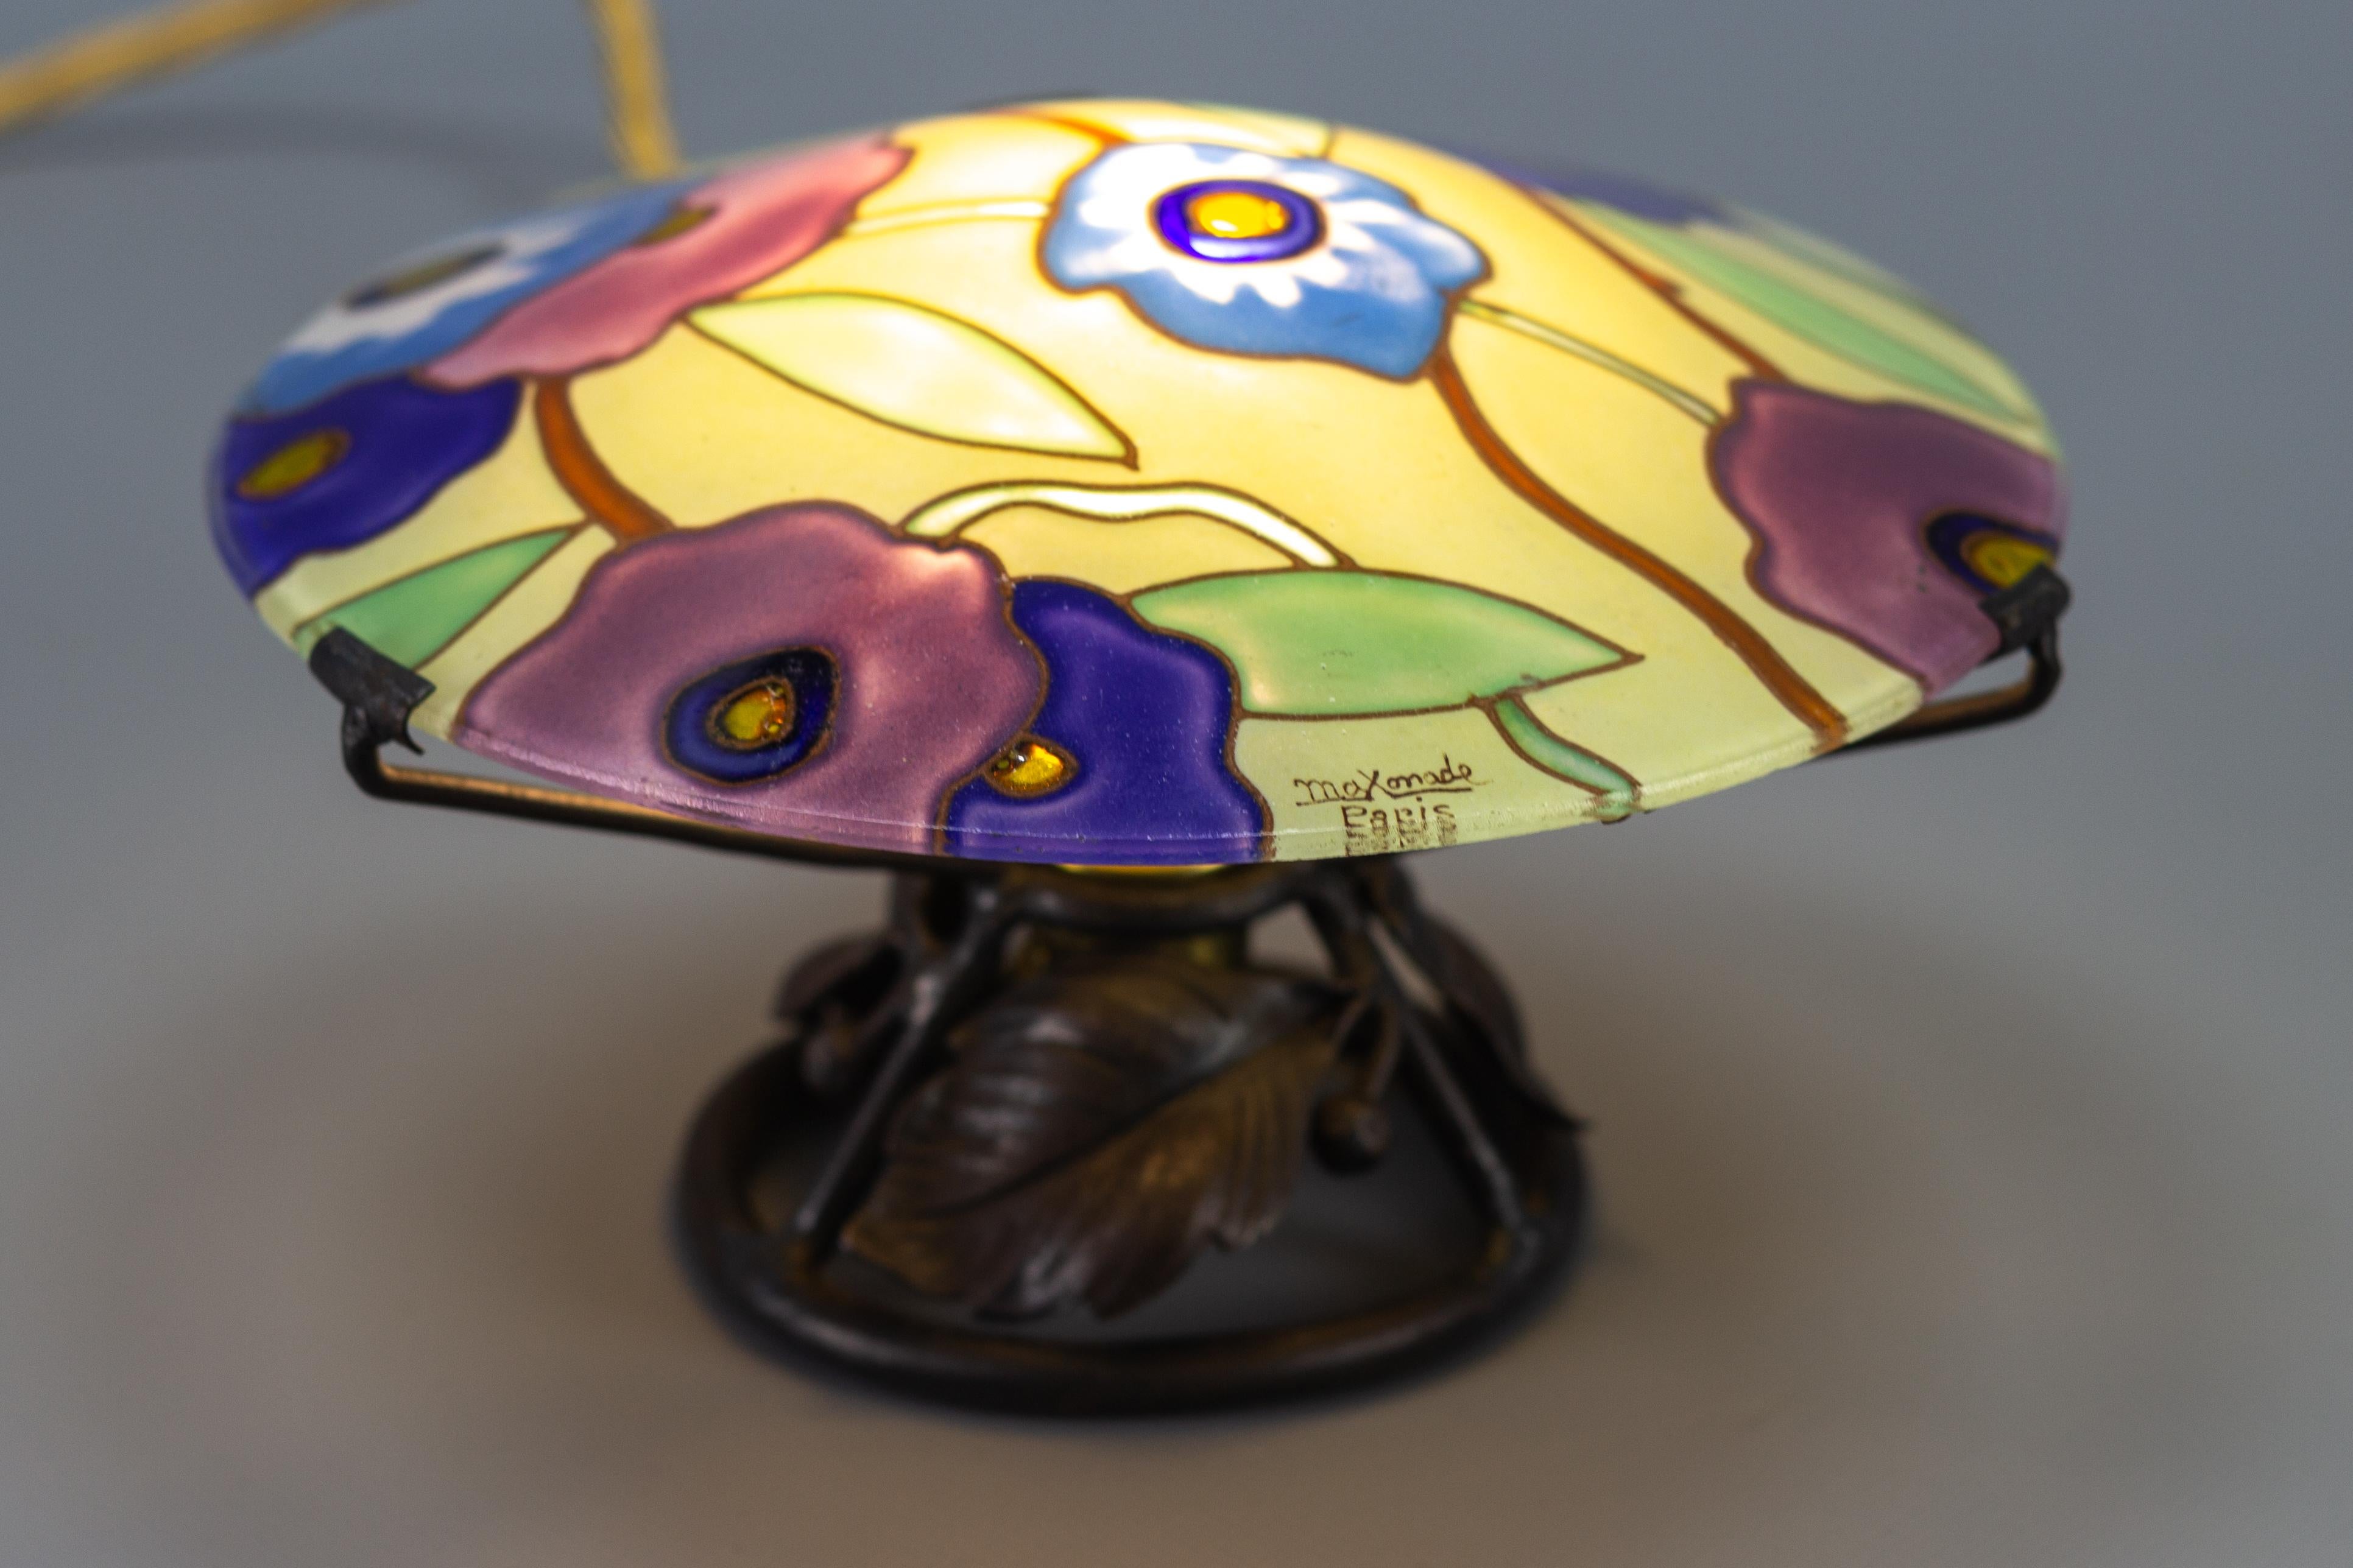 An absolutely rare and charming Art Deco table lamp or nightlight by Maxonade Verrier D’Art, Paris, with stylized polychrome floral pattern decoration. The drawing is hand-painted enamel paint on glass, signed 'Maxonade Paris'. Adorable wrought iron